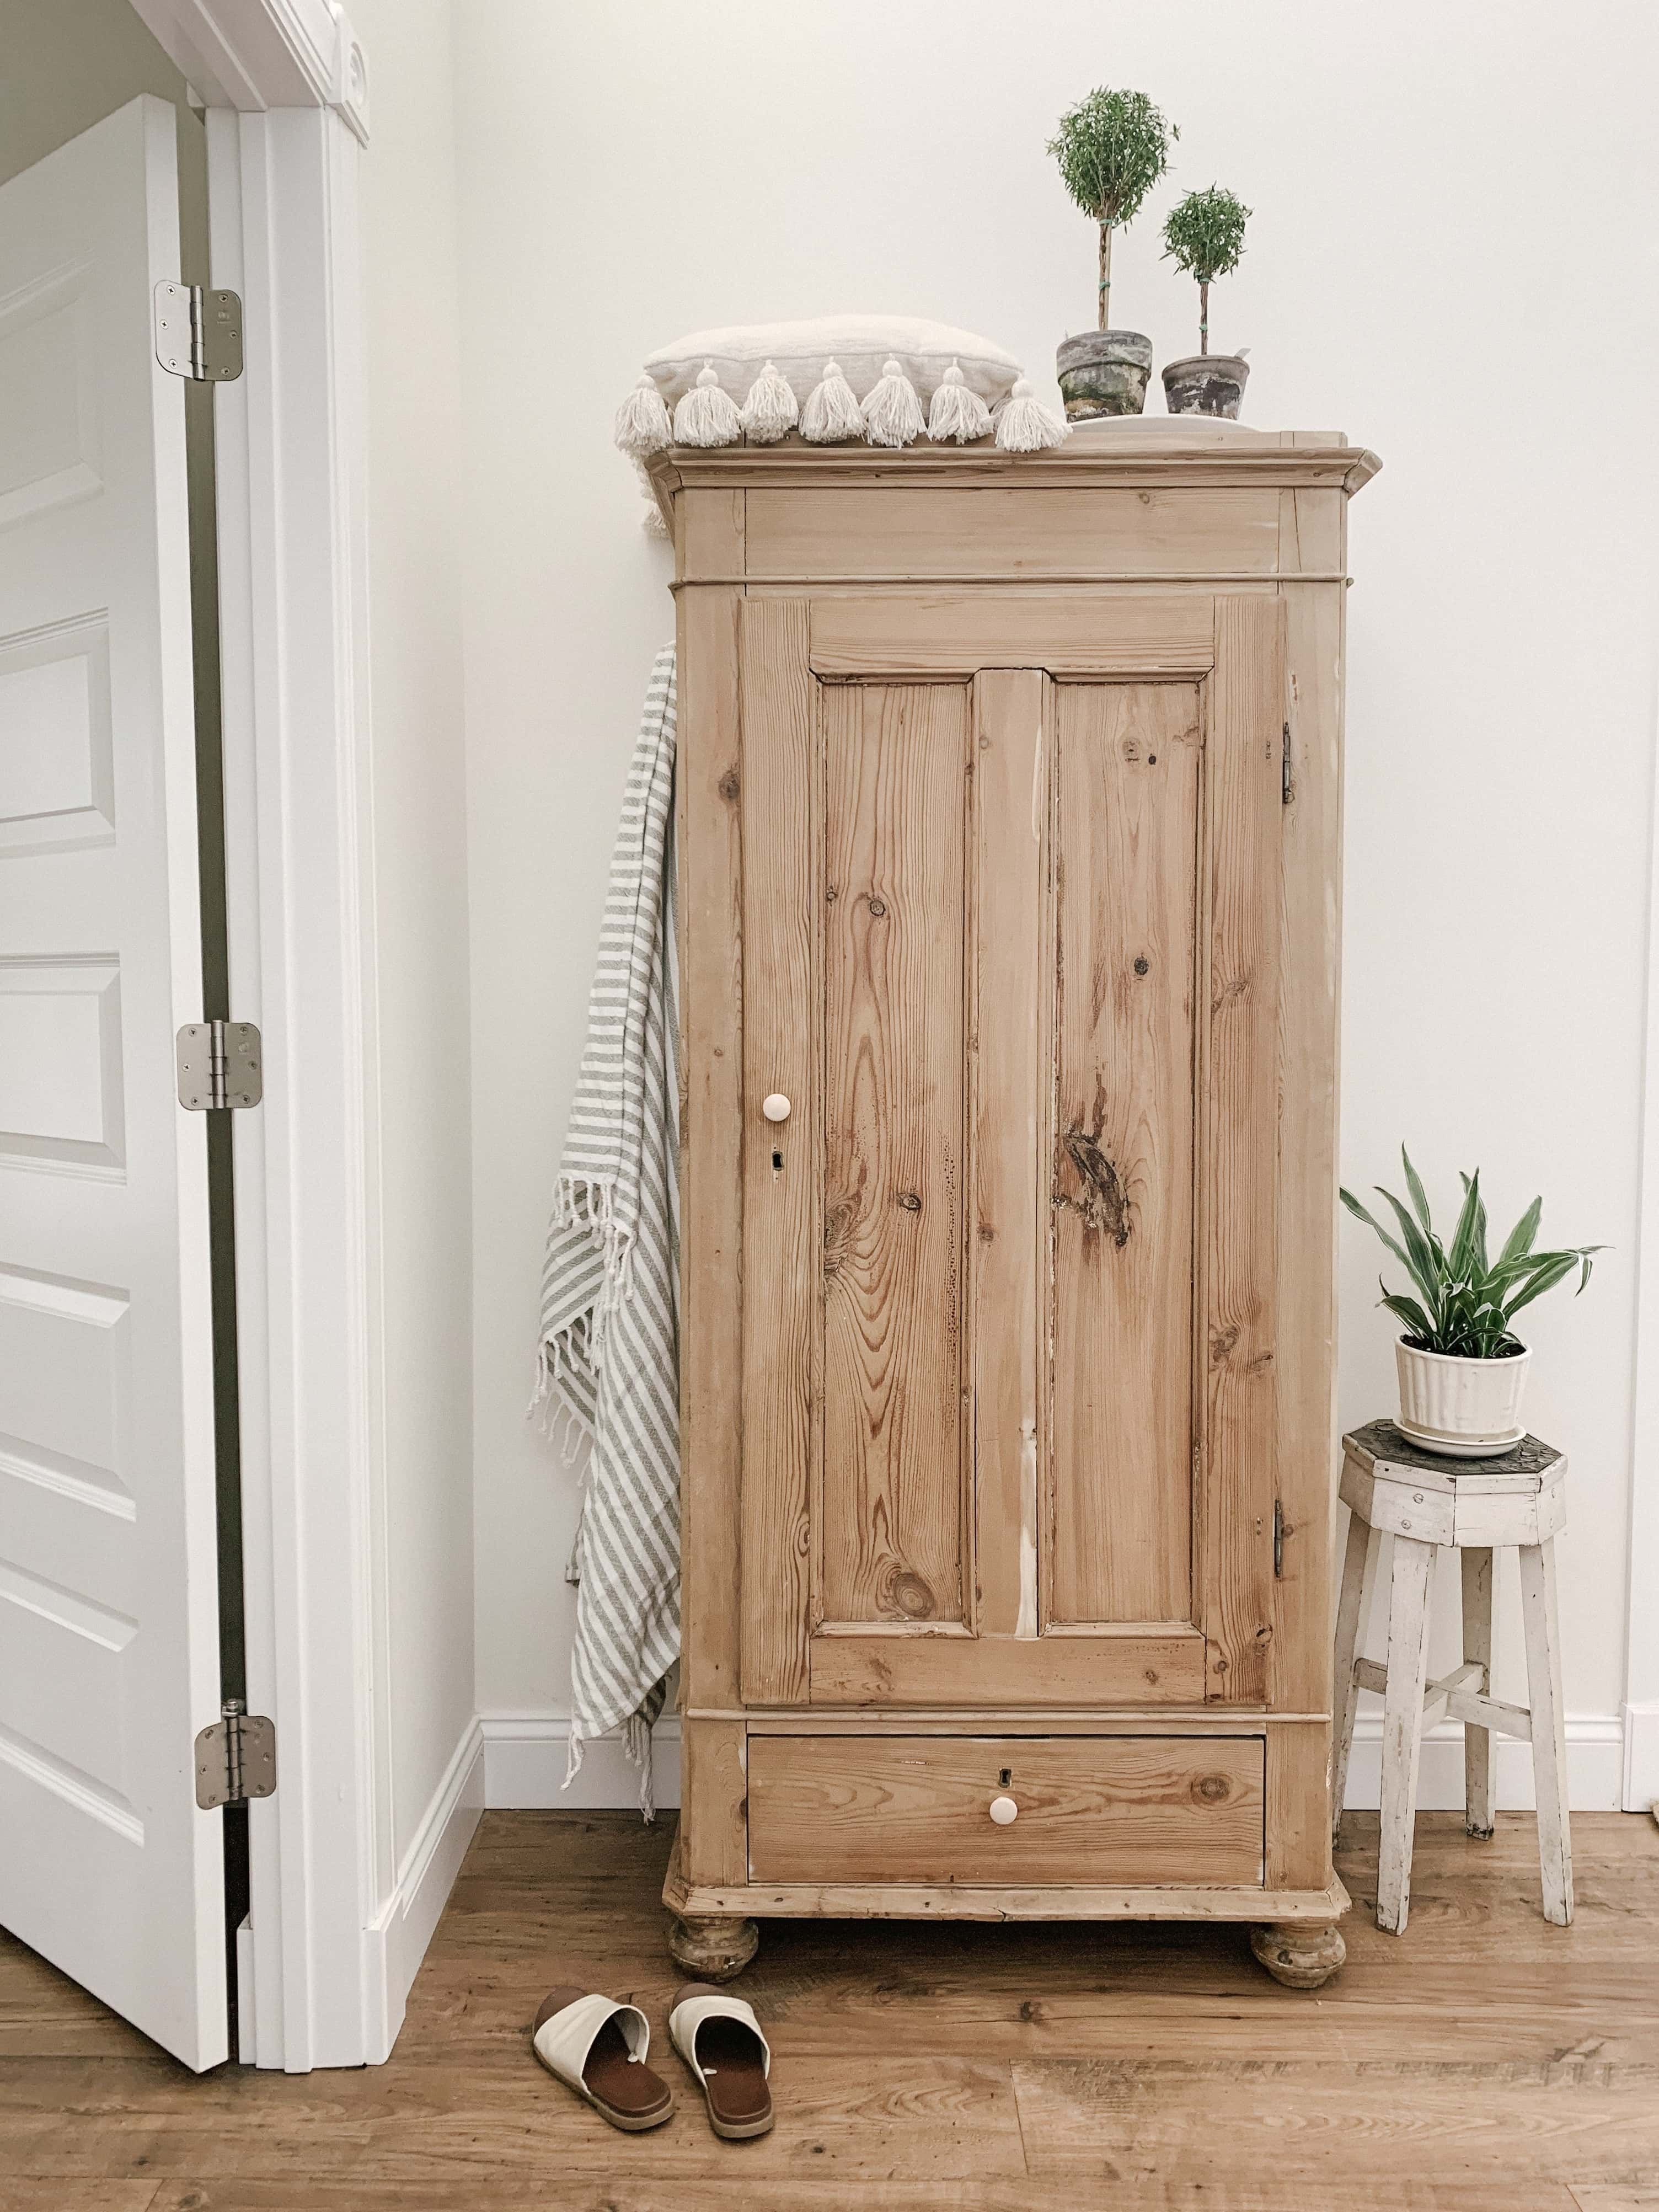 Antique Pine Wardrobe In Entryway – Sarah Jane Christy With Natural Pine Wardrobes (View 7 of 15)